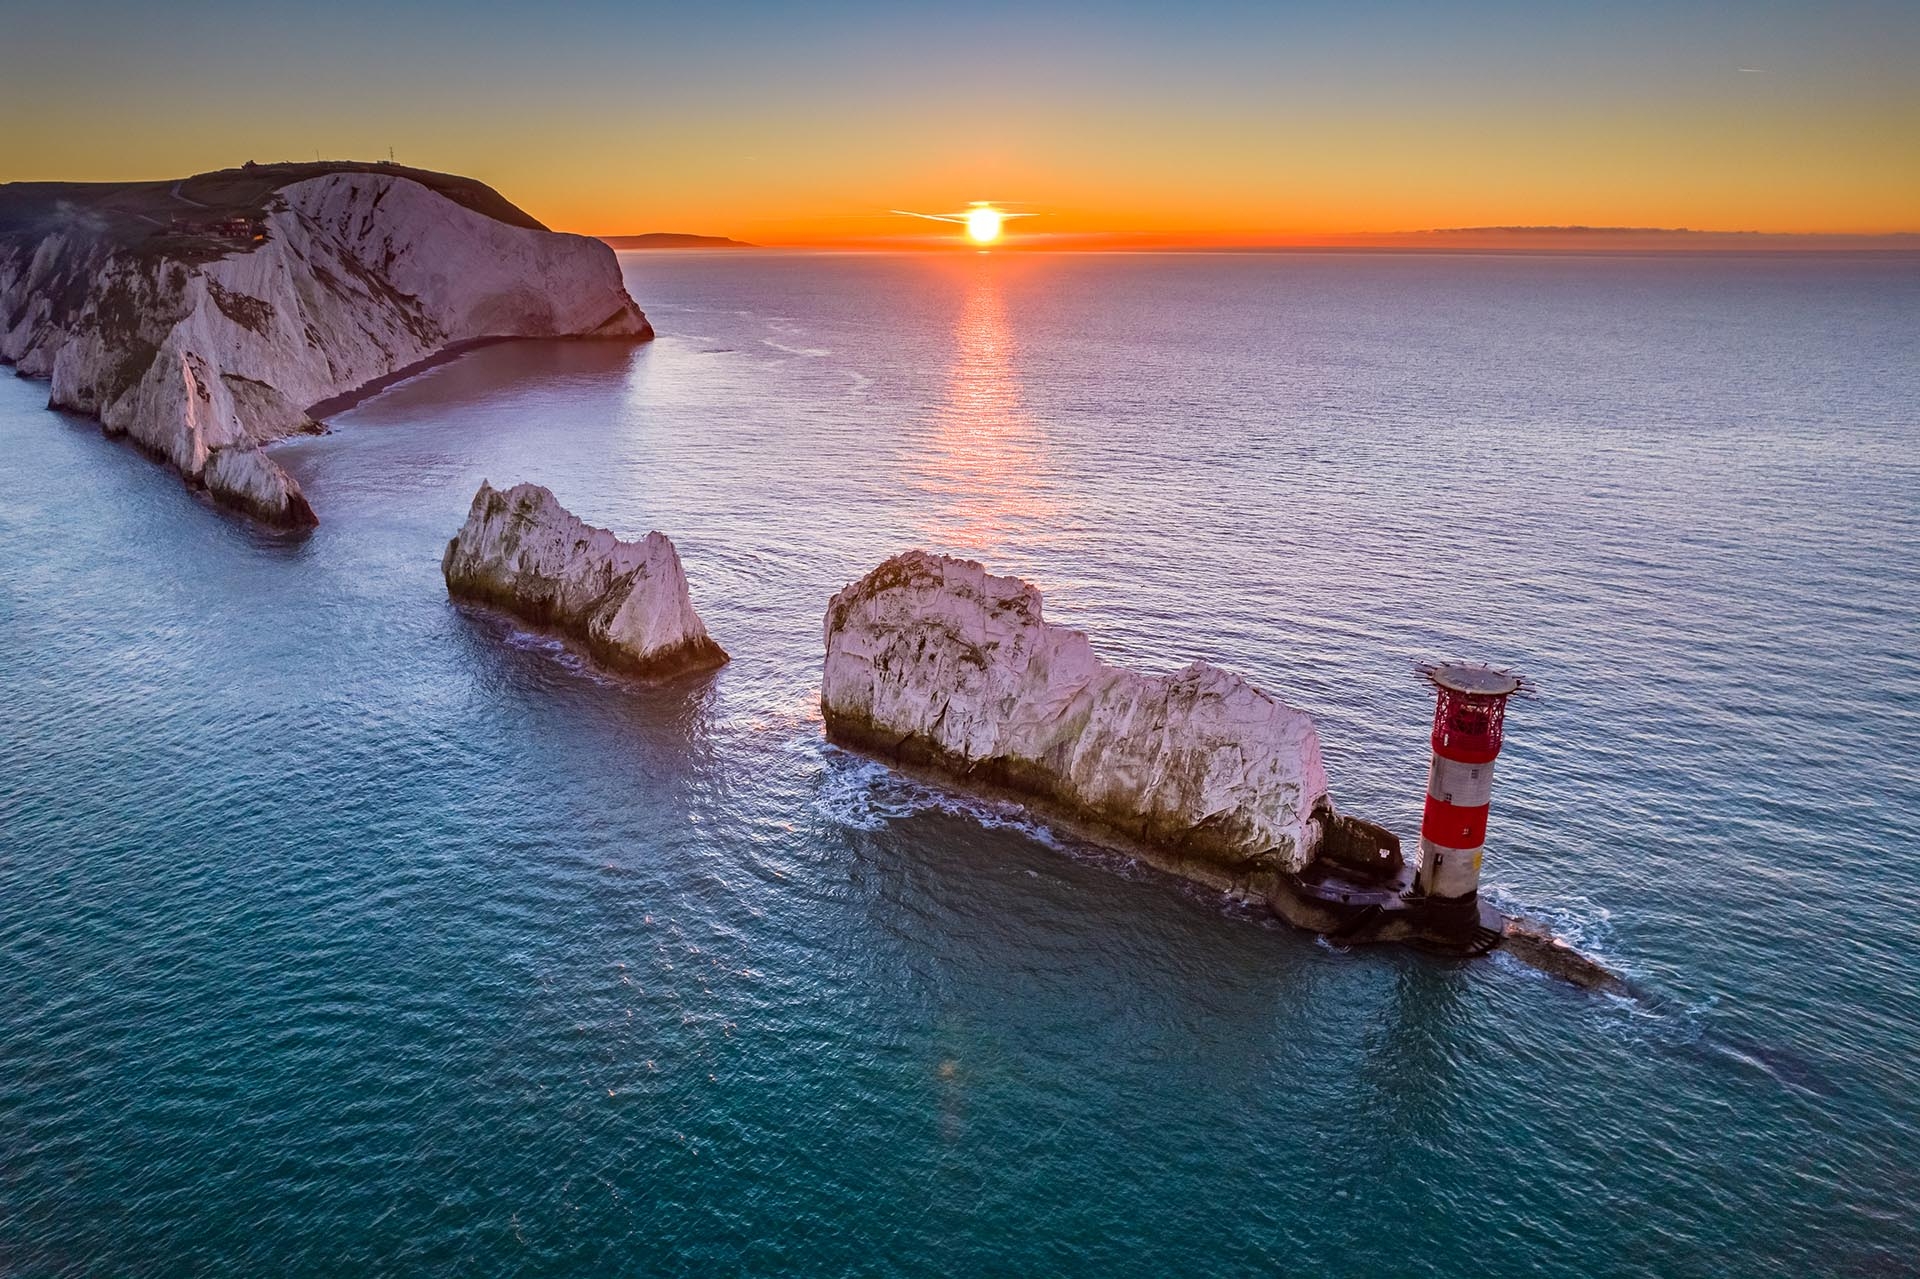 Isle of Wight at dusk